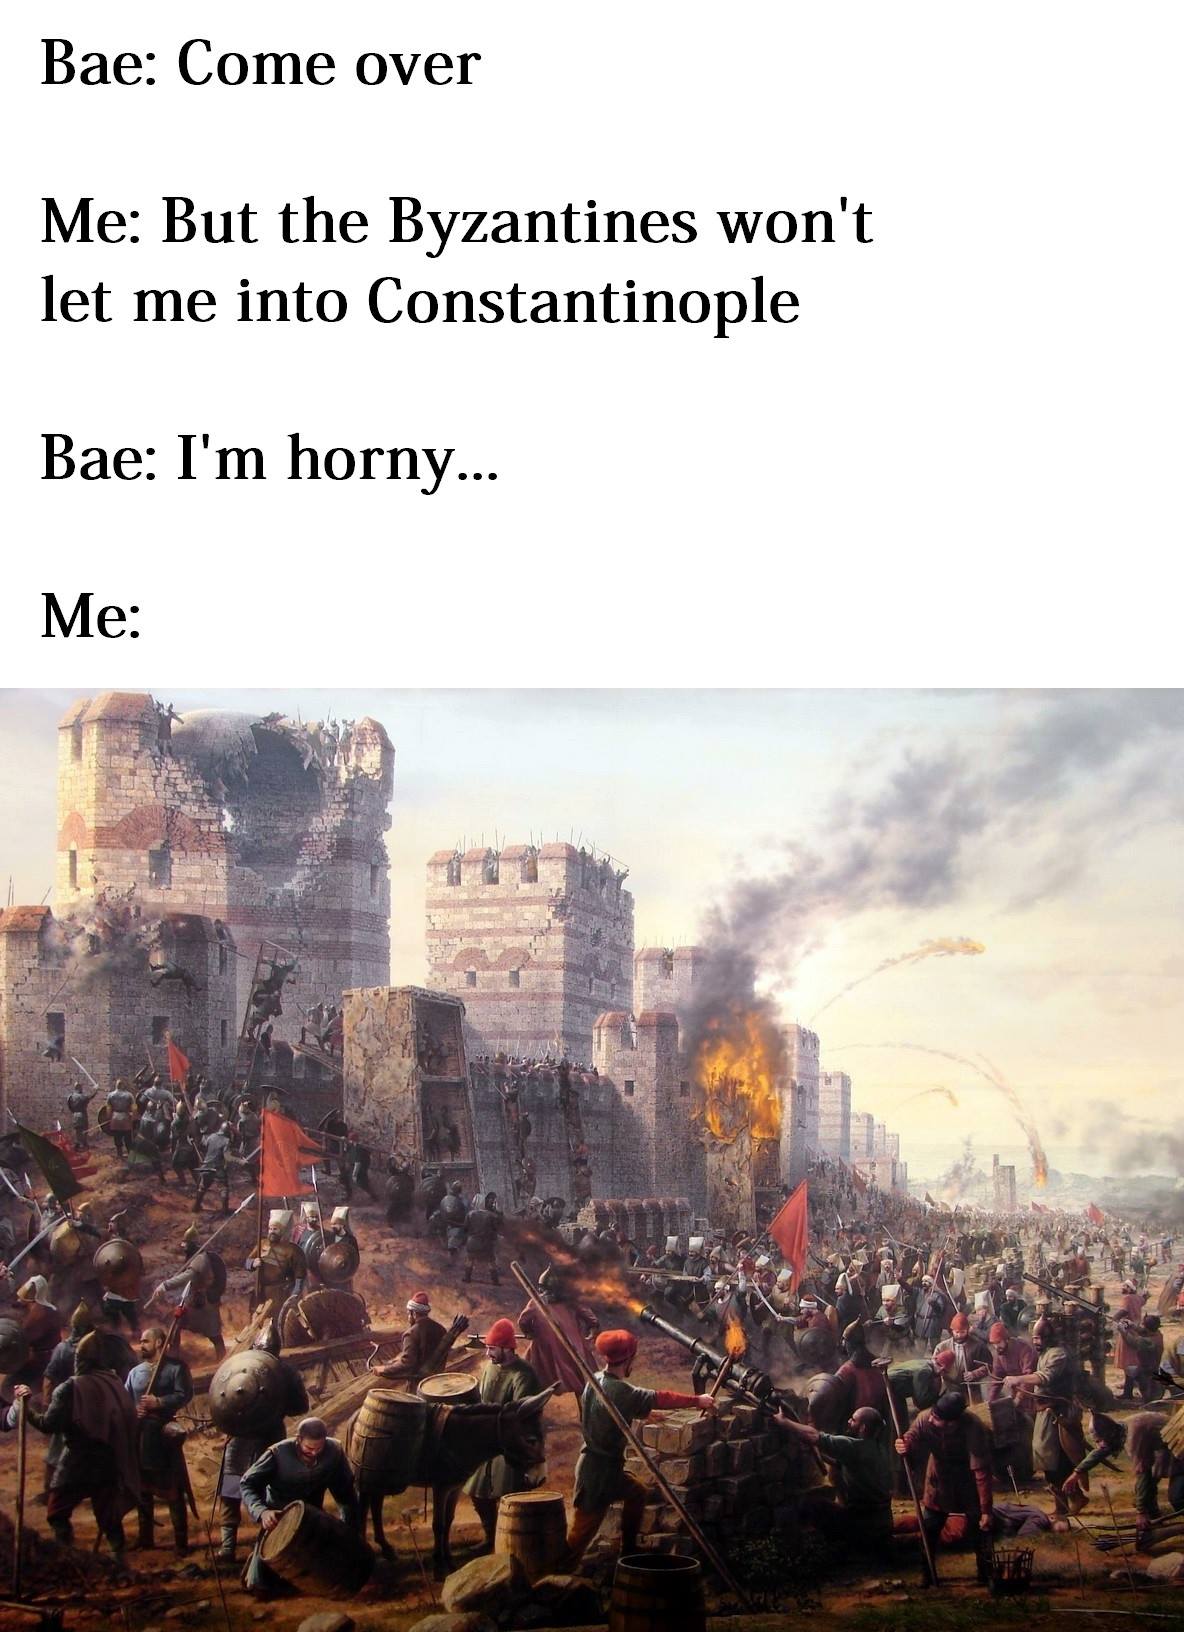 fall of constantinople - Bae Come over Me But the Byzantines won't let me into Constantinople Bae I'm horny... Me